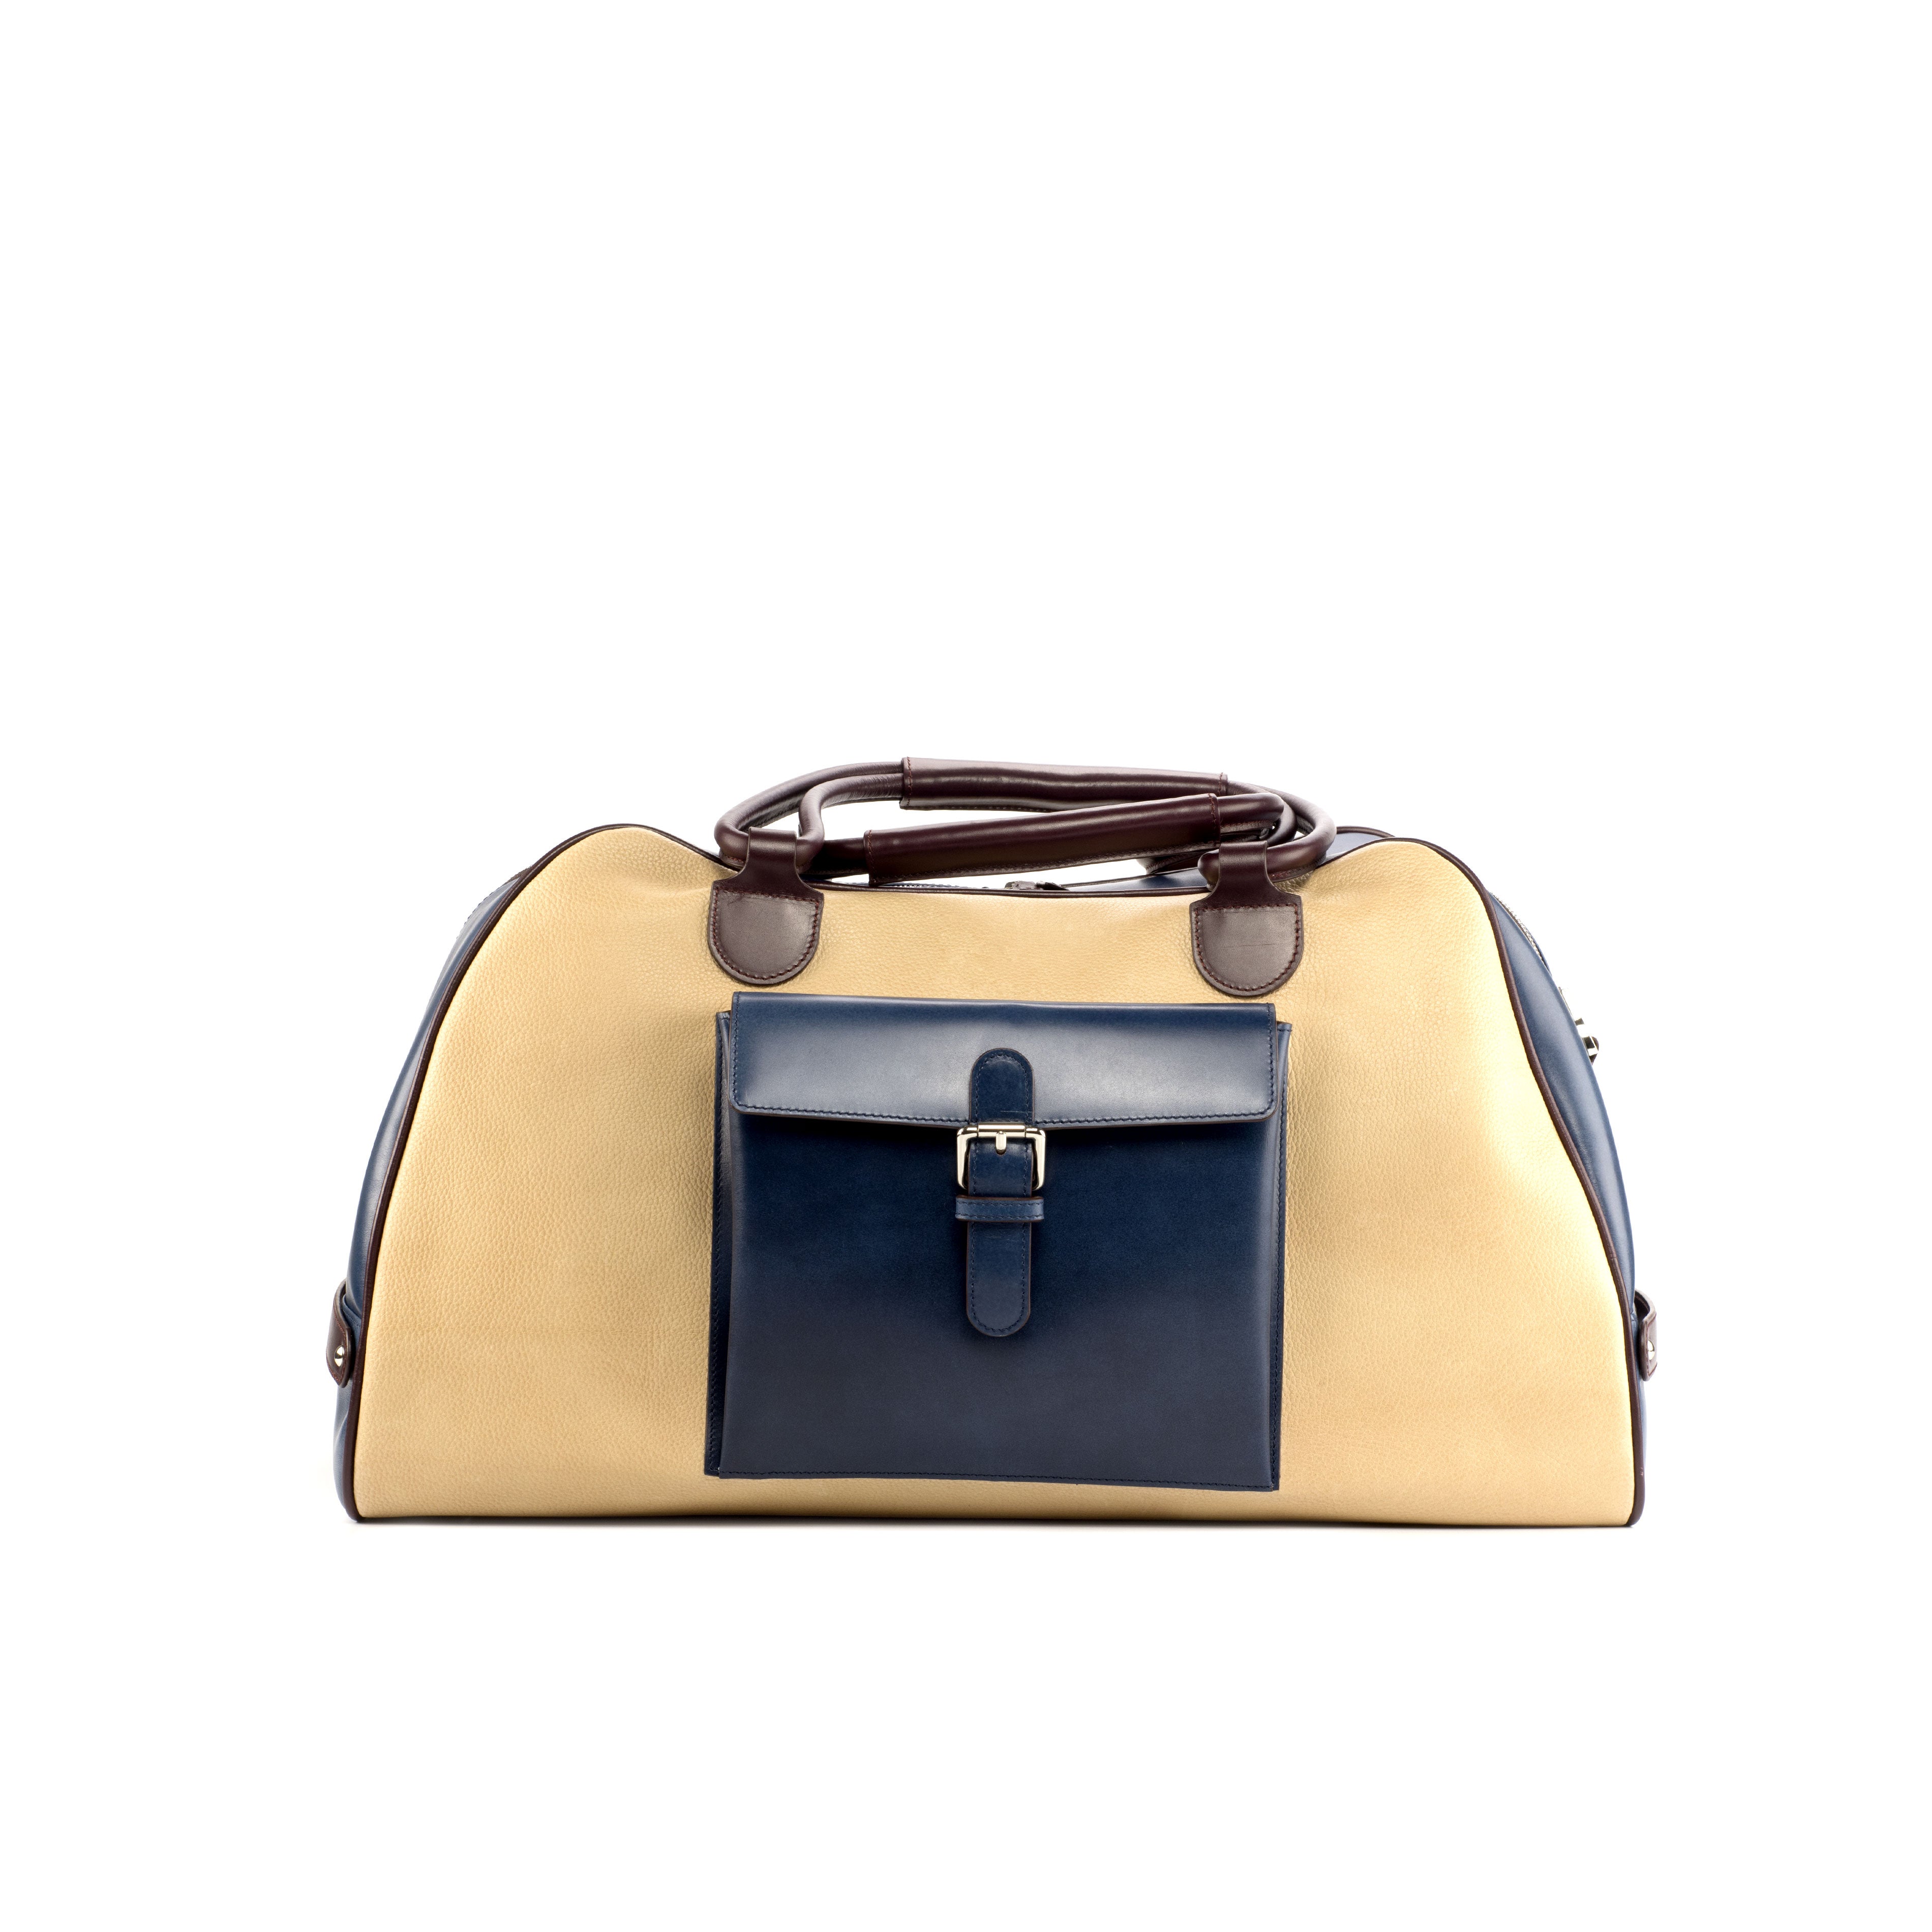 Fawn & Navy Painted Calf Travel Duffle